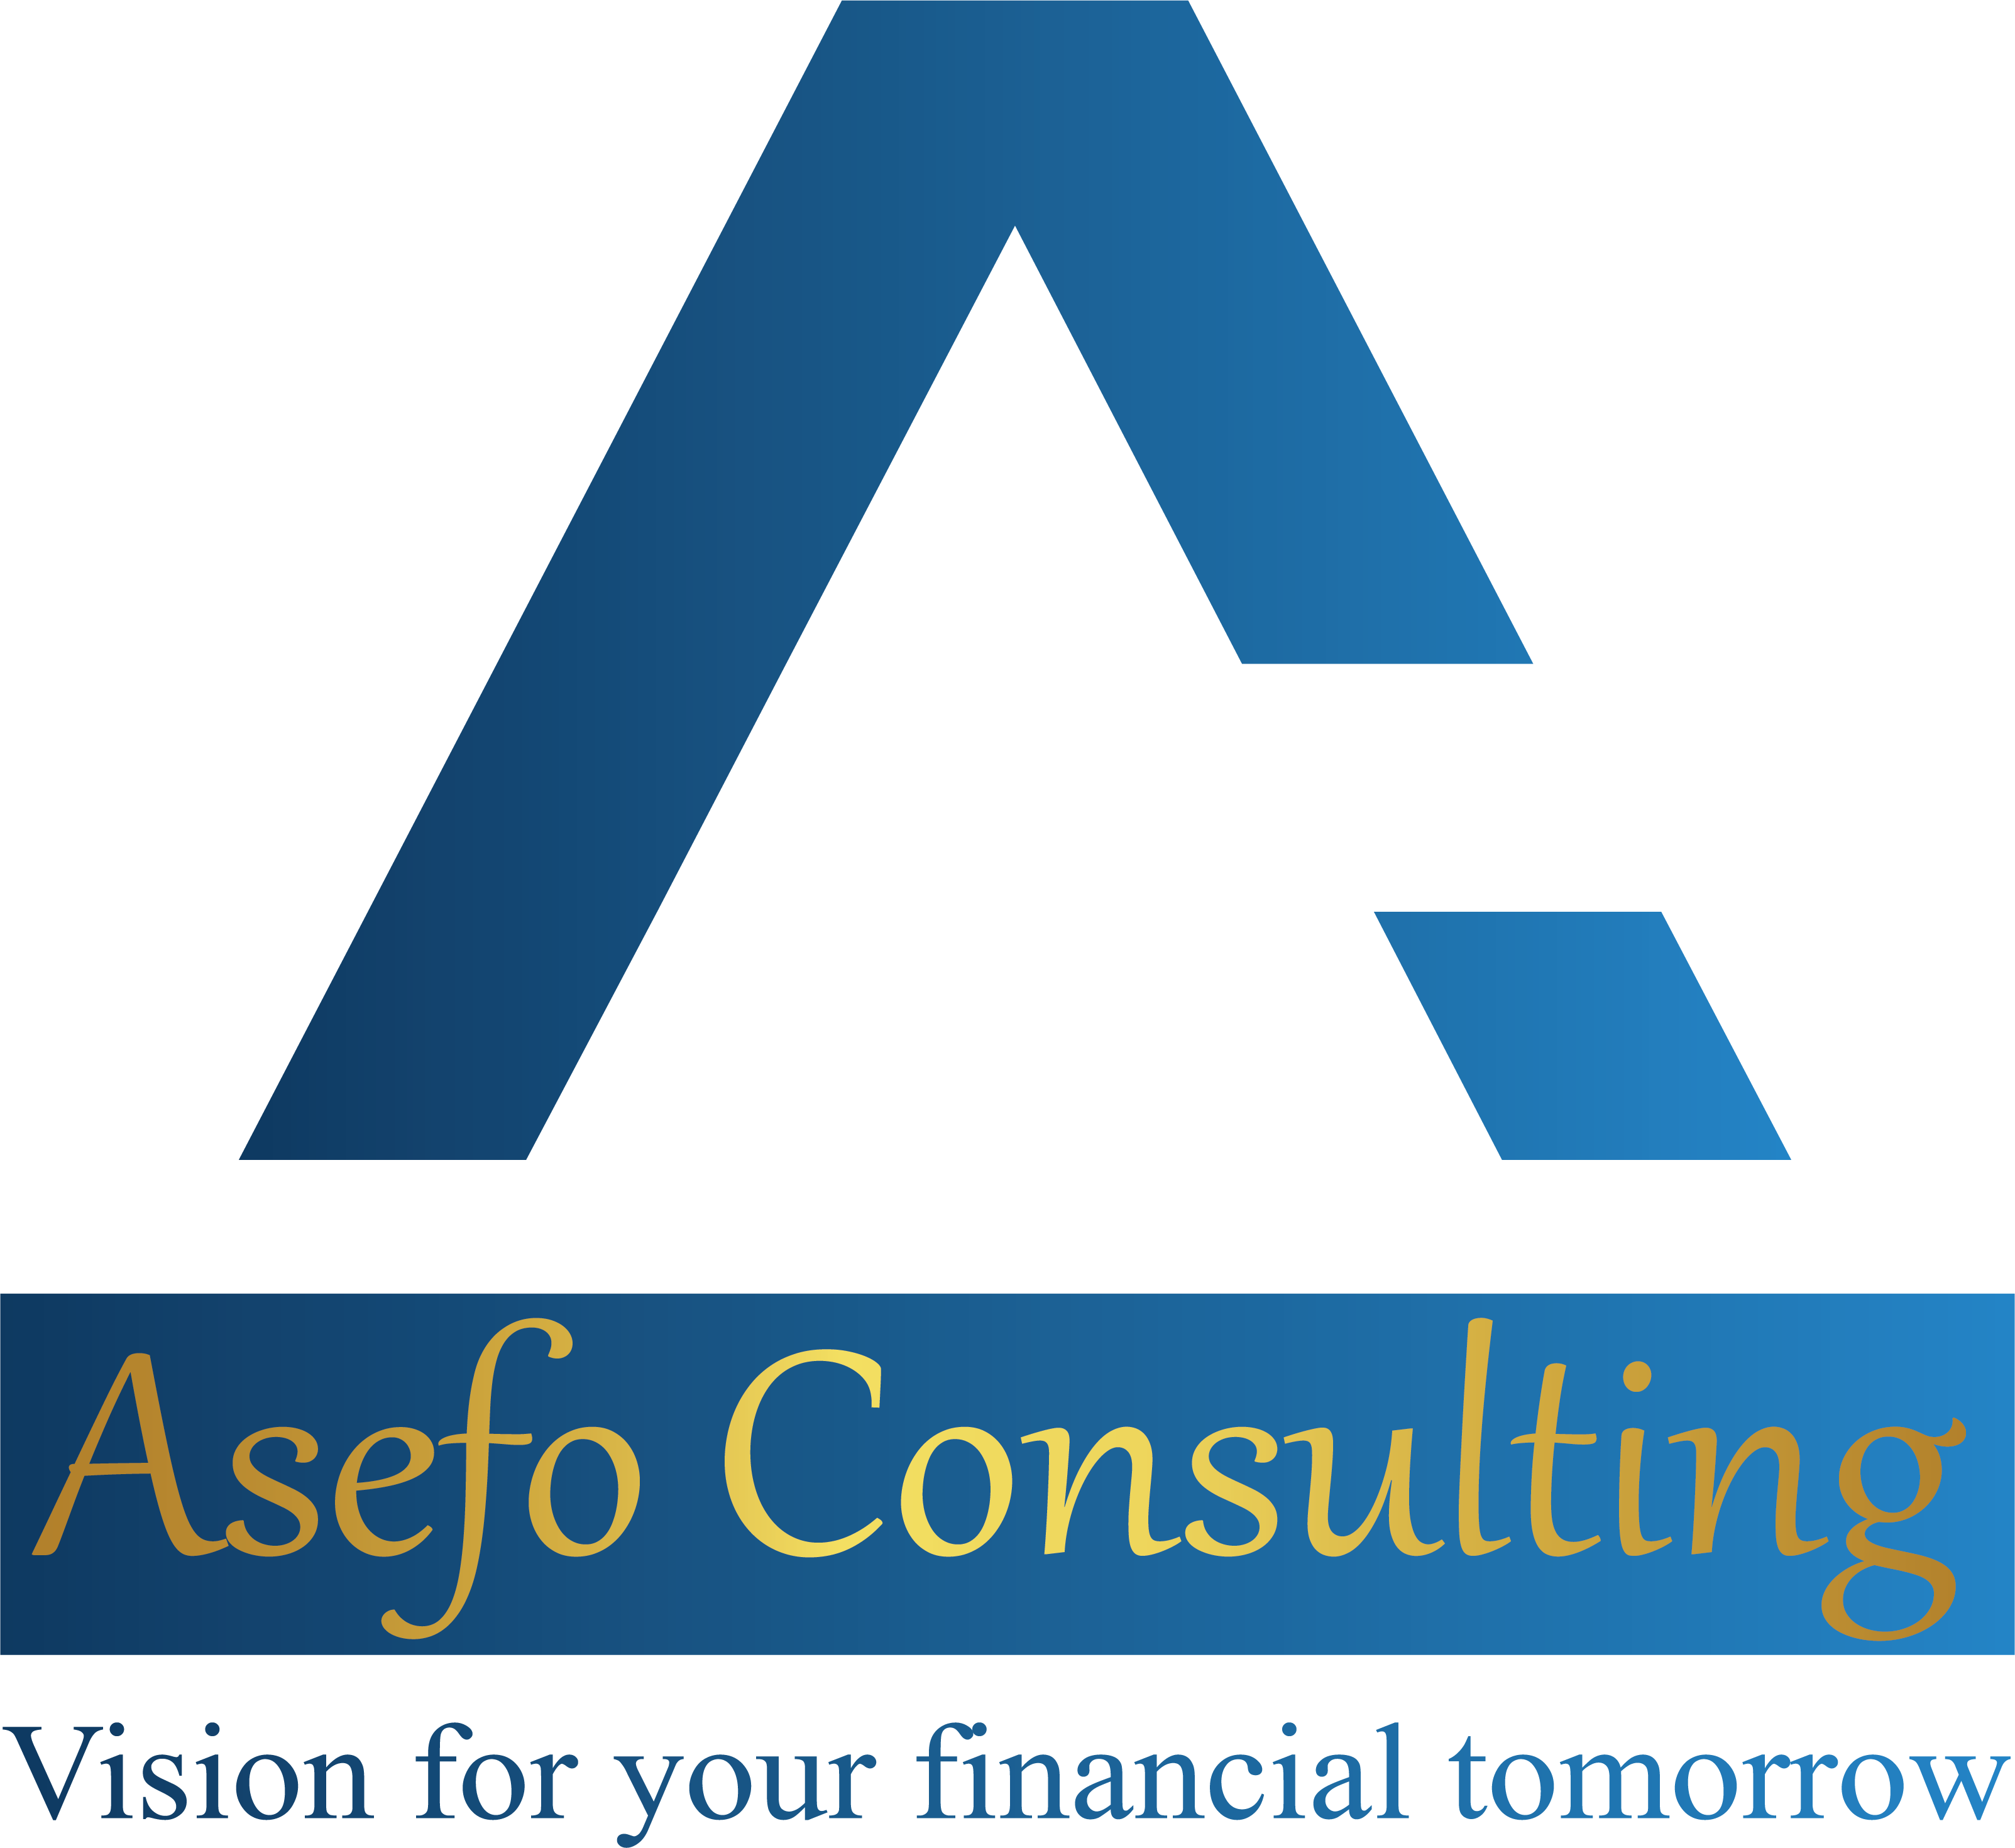 Asefo Consulting